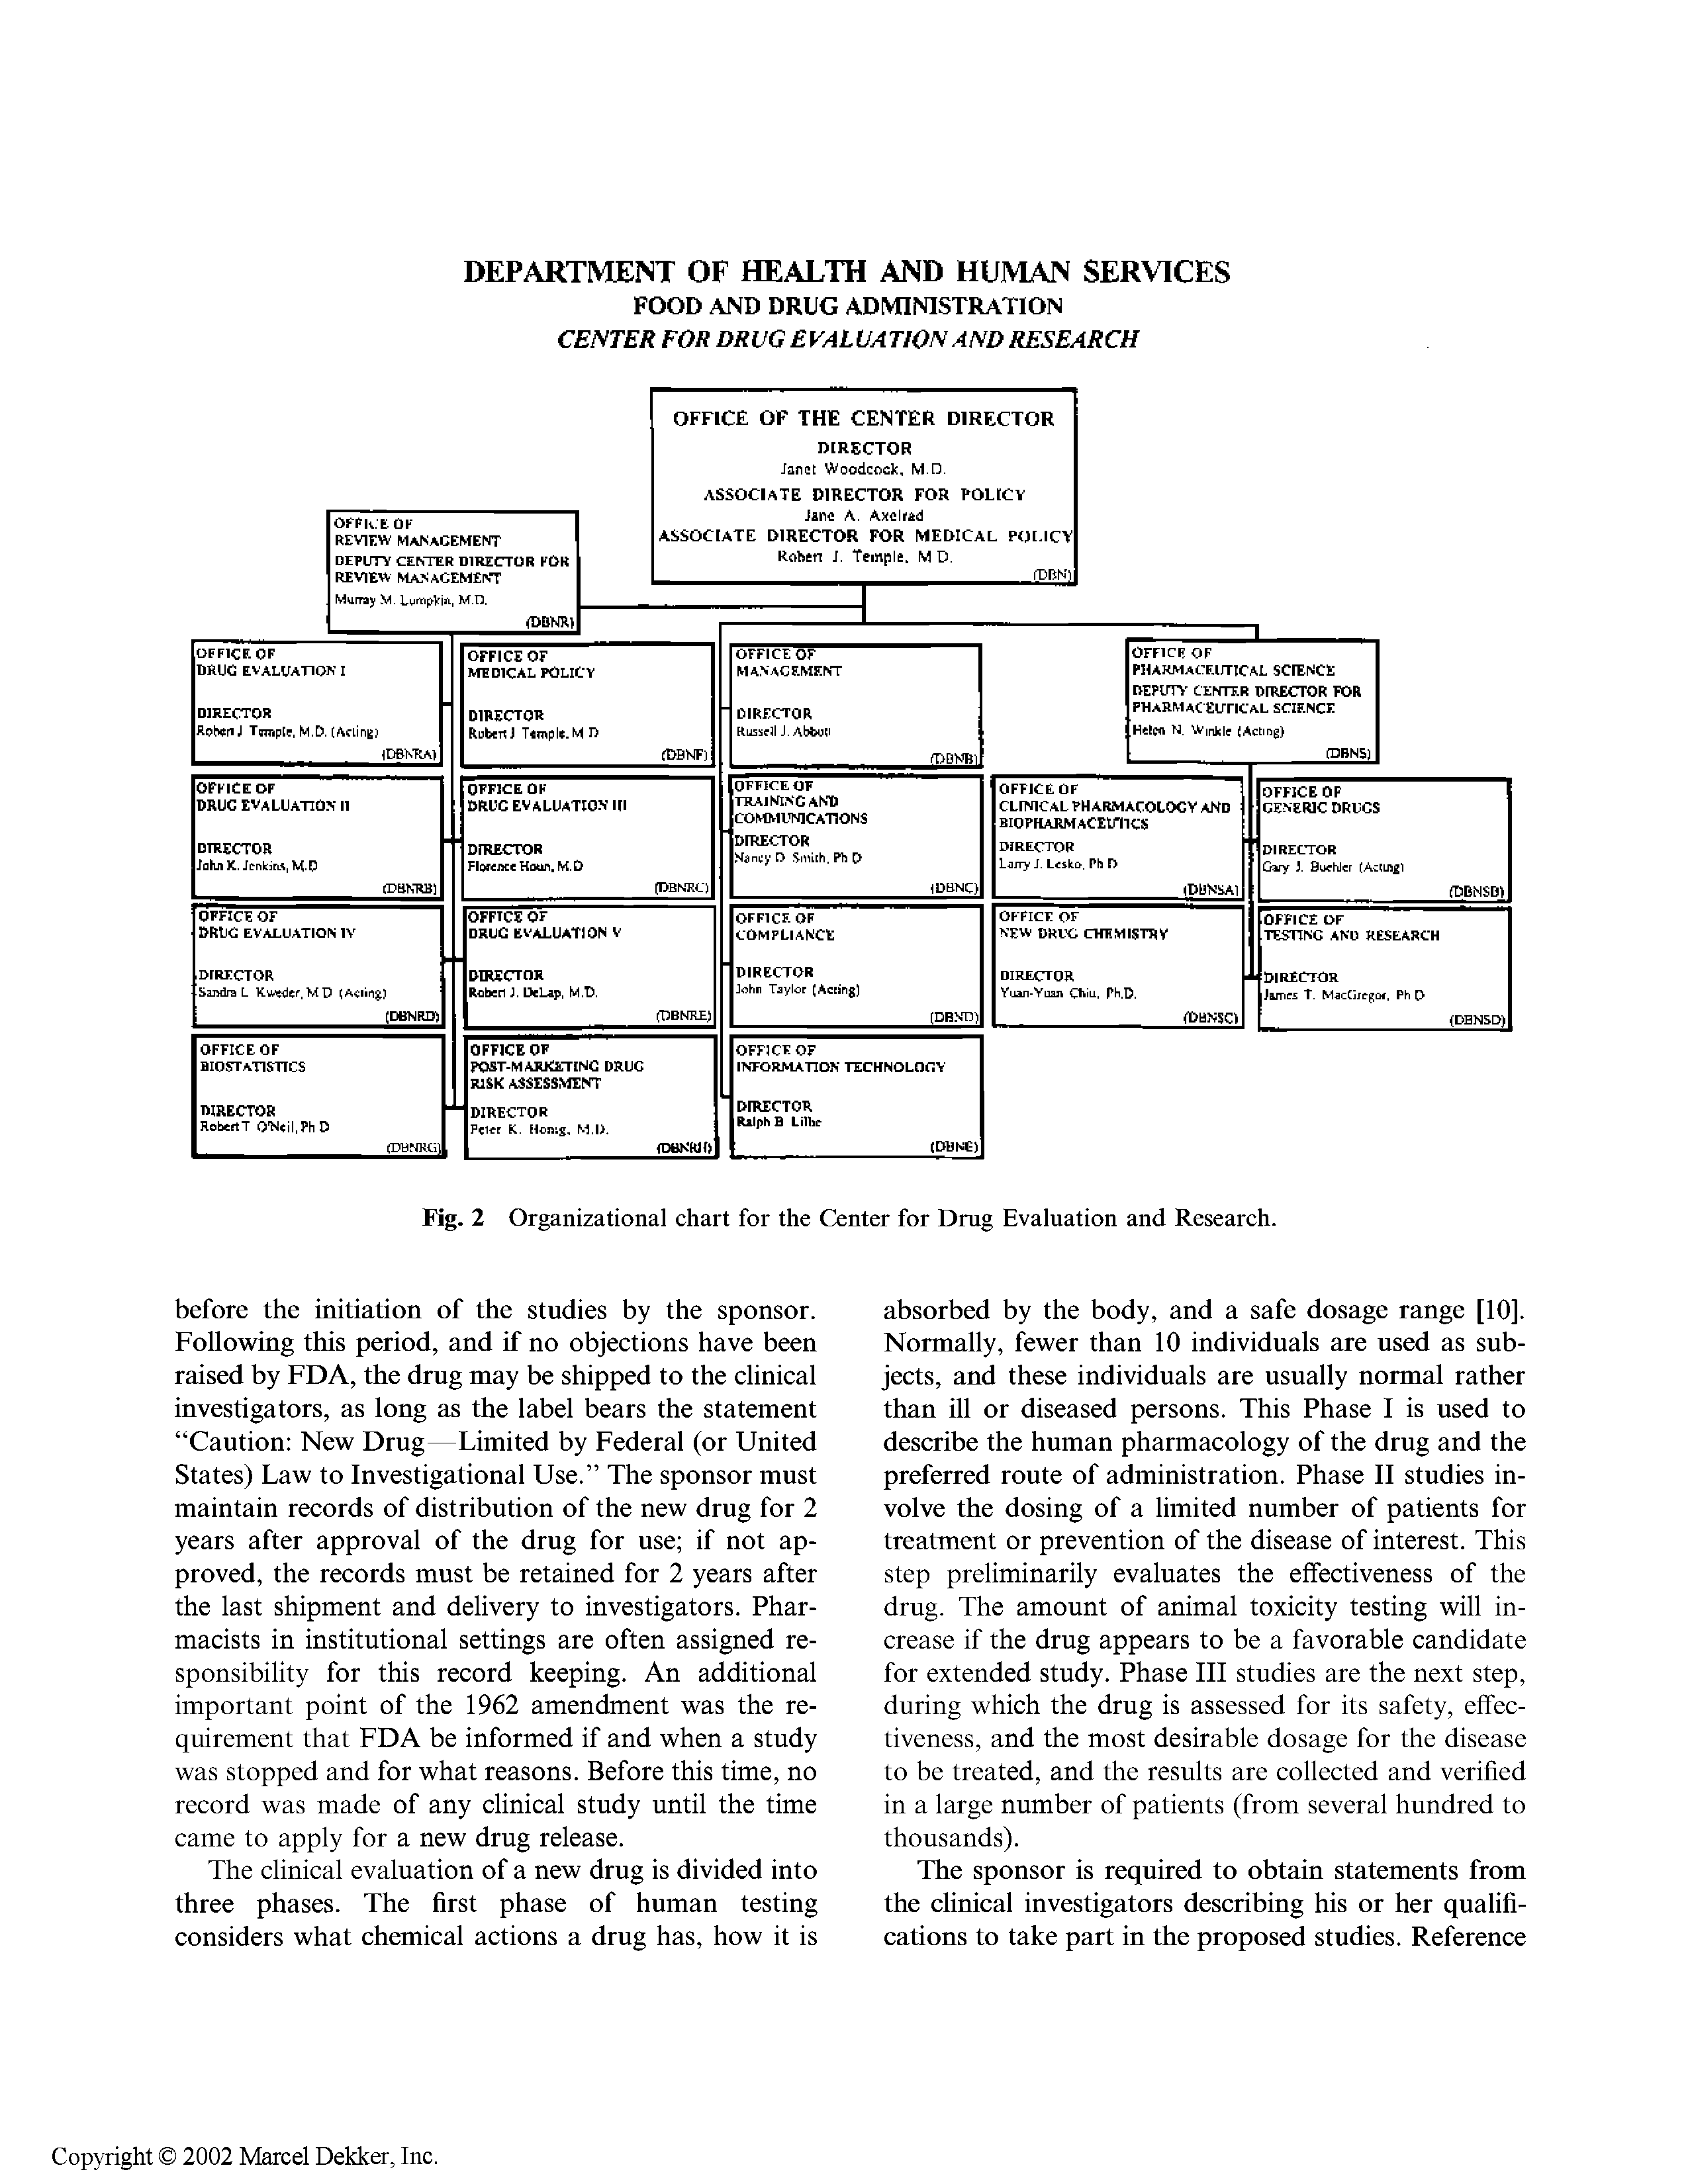 Fig. 2 Organizational chart for the Center for Drug Evaluation and Research.